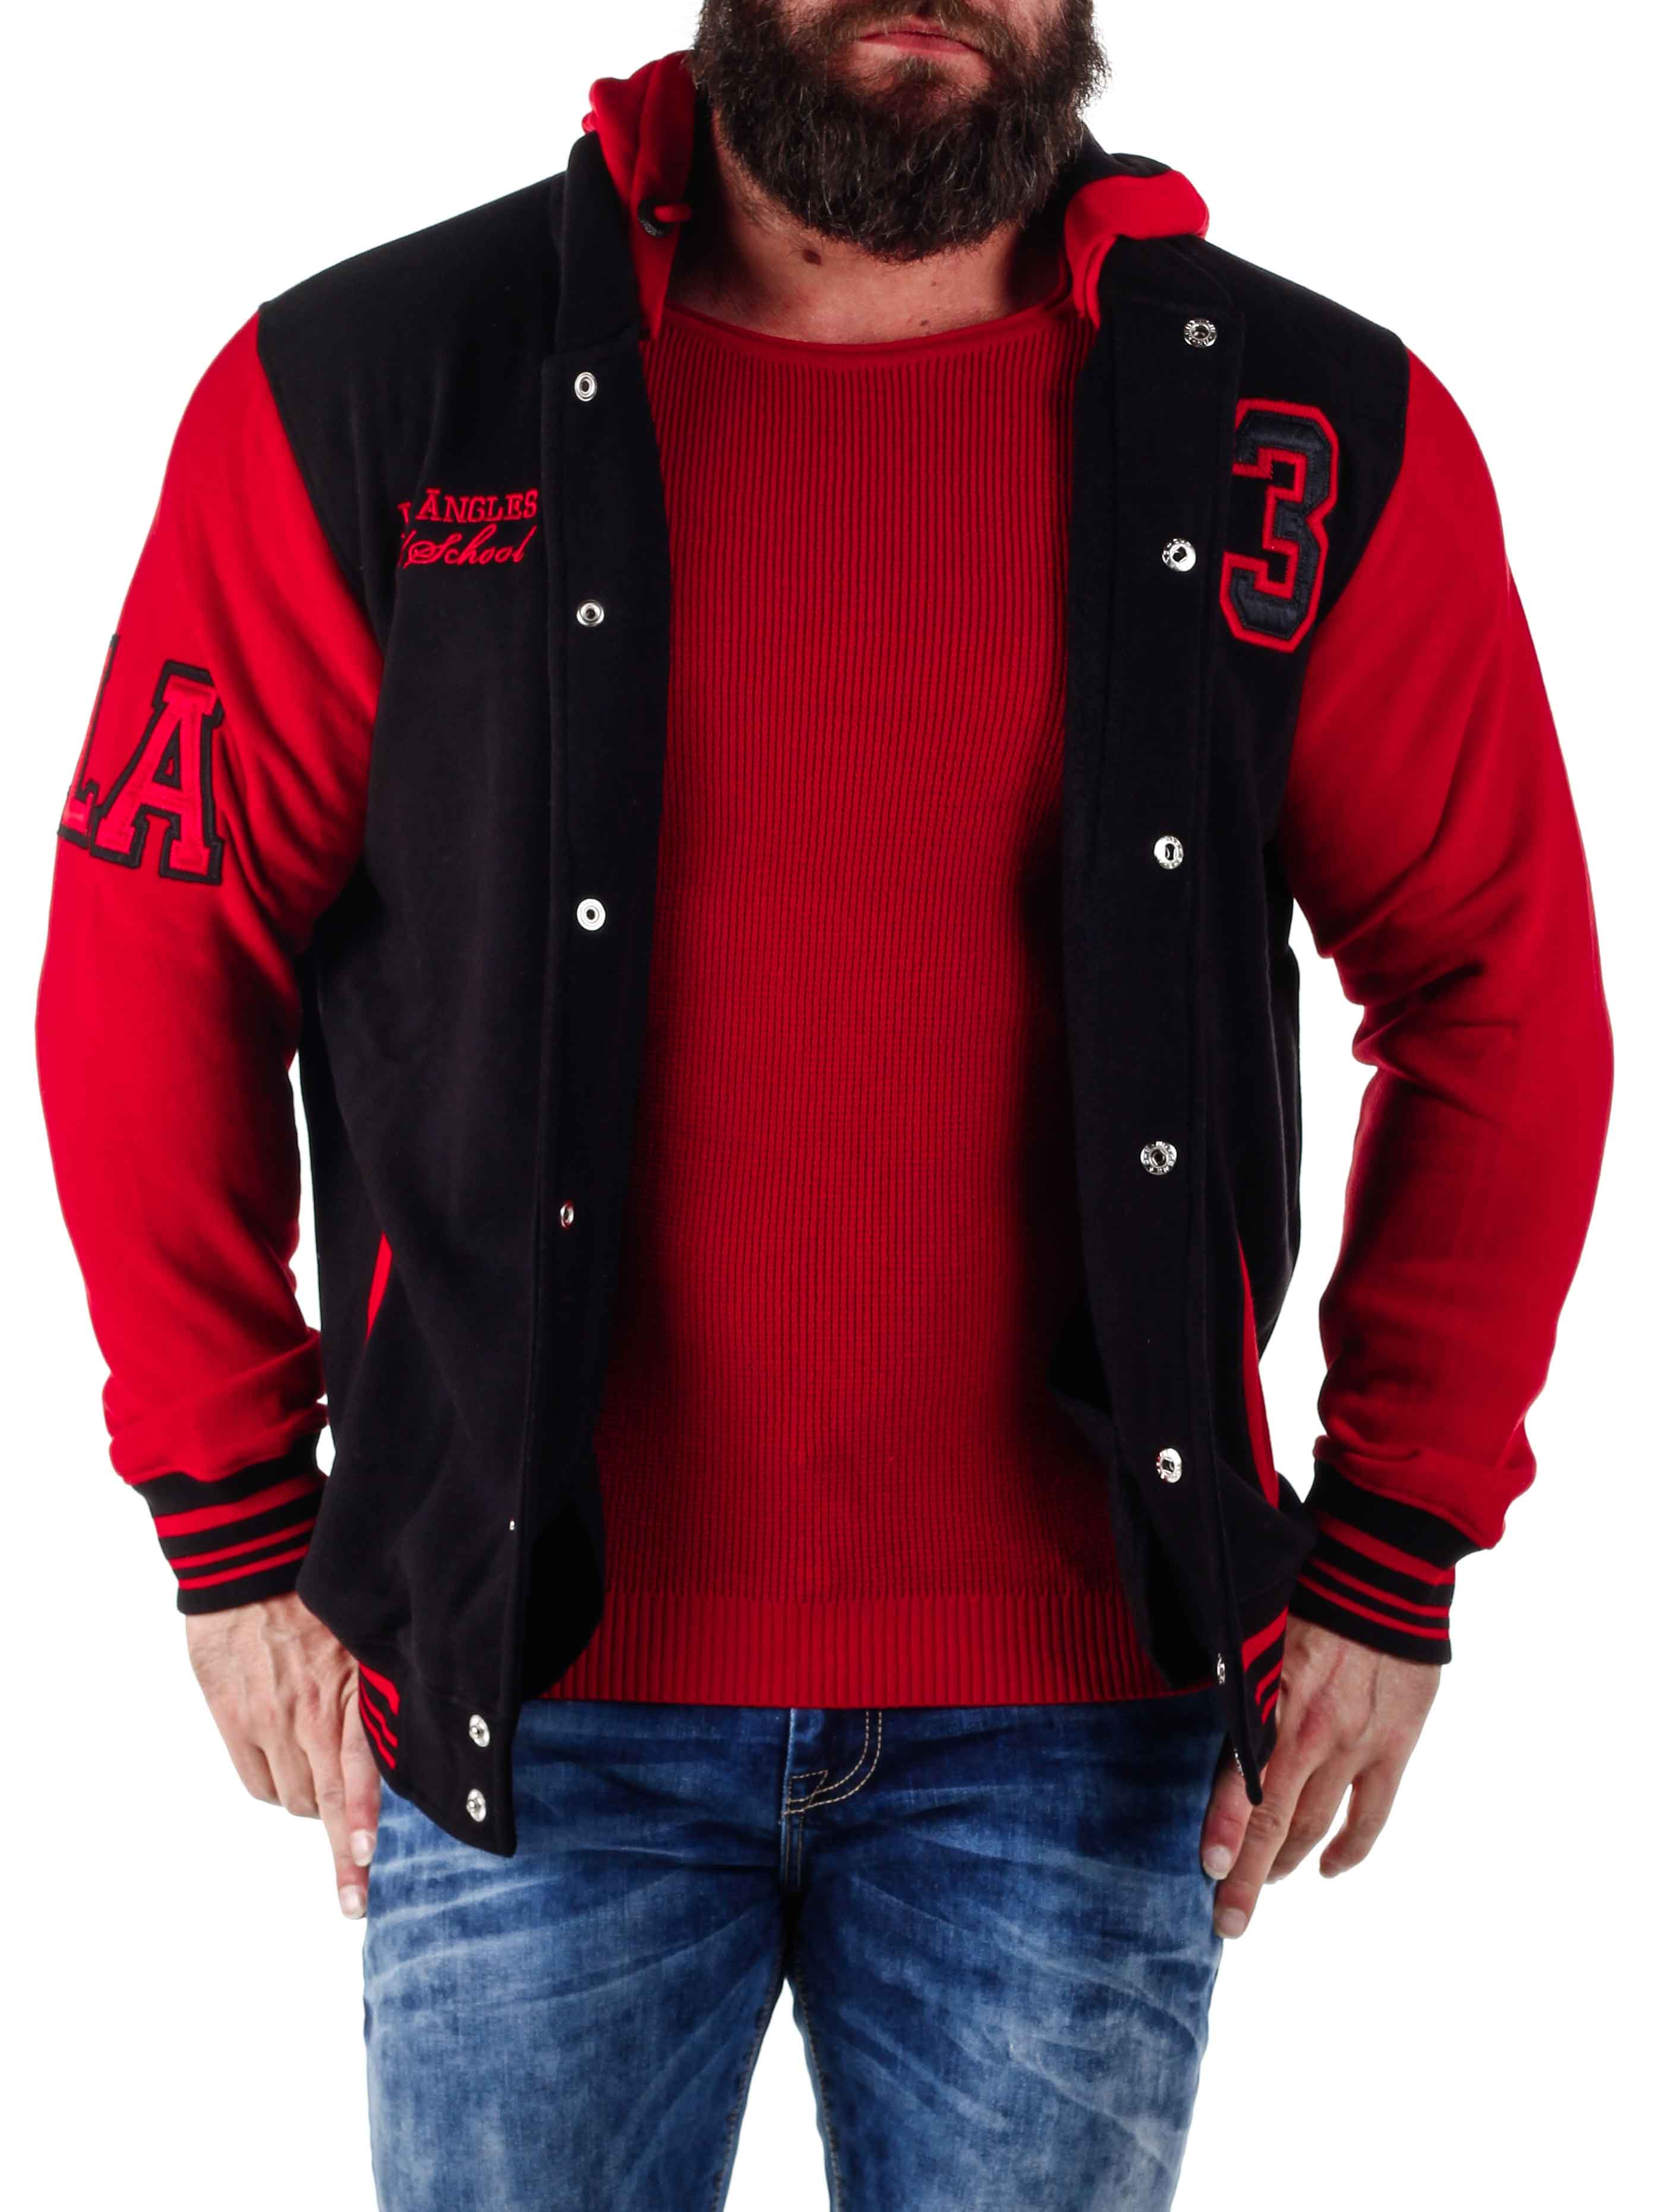 D-R6876-1-black-red (1 of 12)